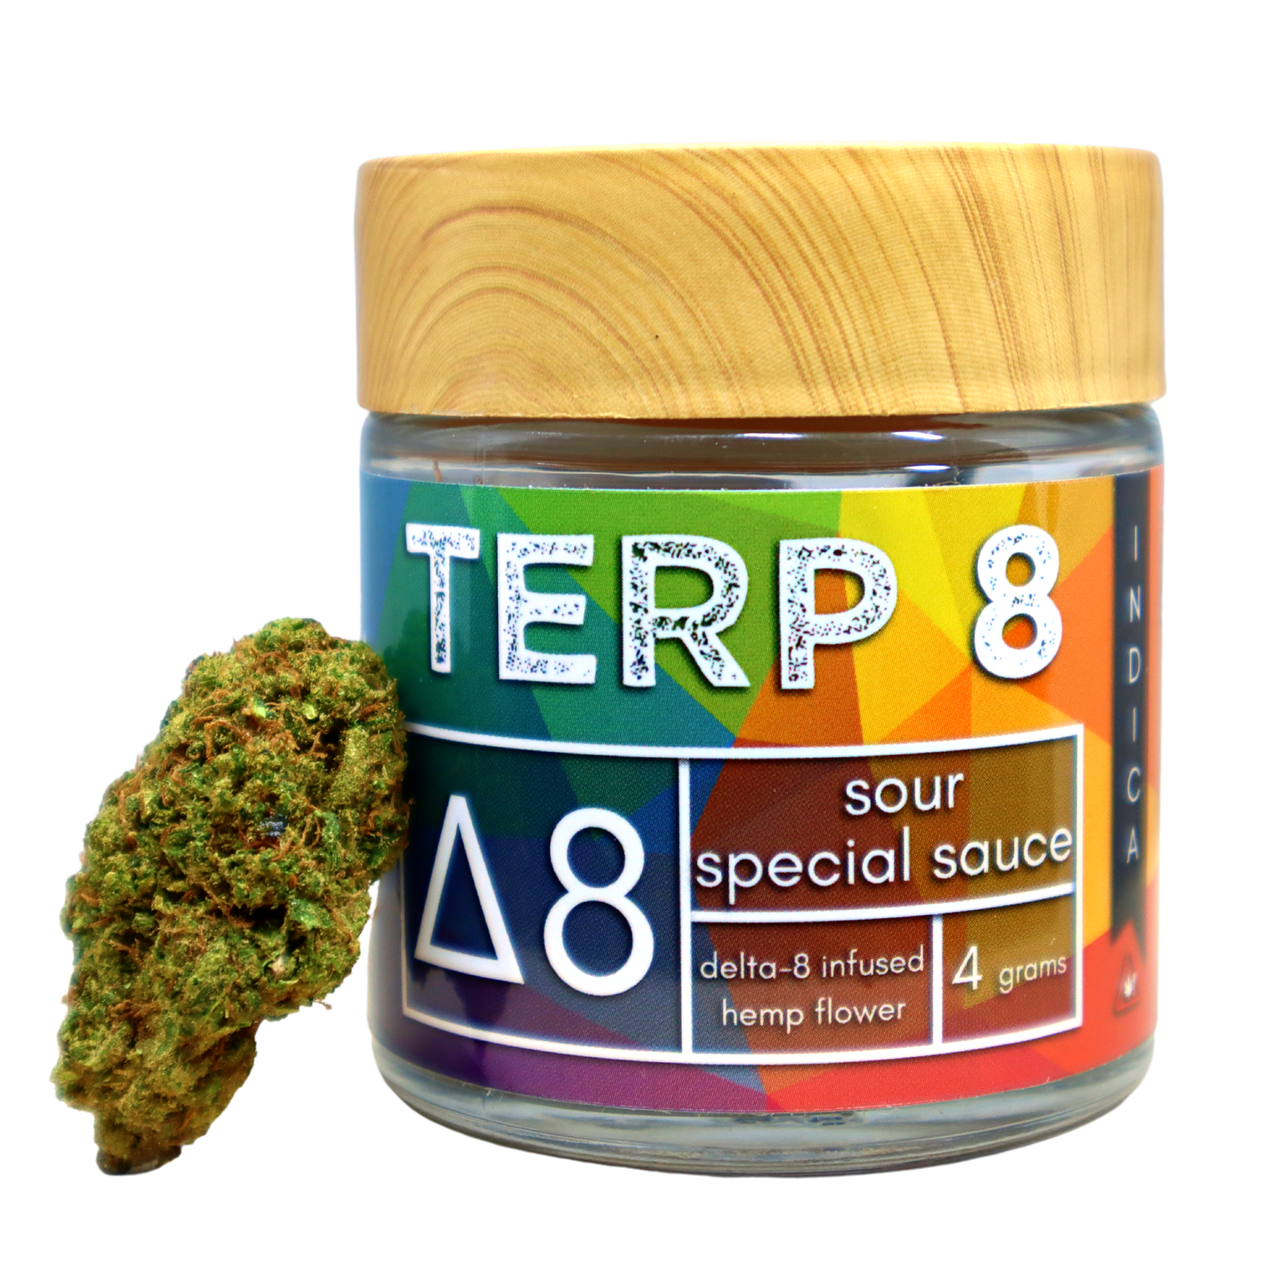 Terp 8 - 4g Delta-8 Infused Hemp Flower - SOUR SPECIAL SAUCE